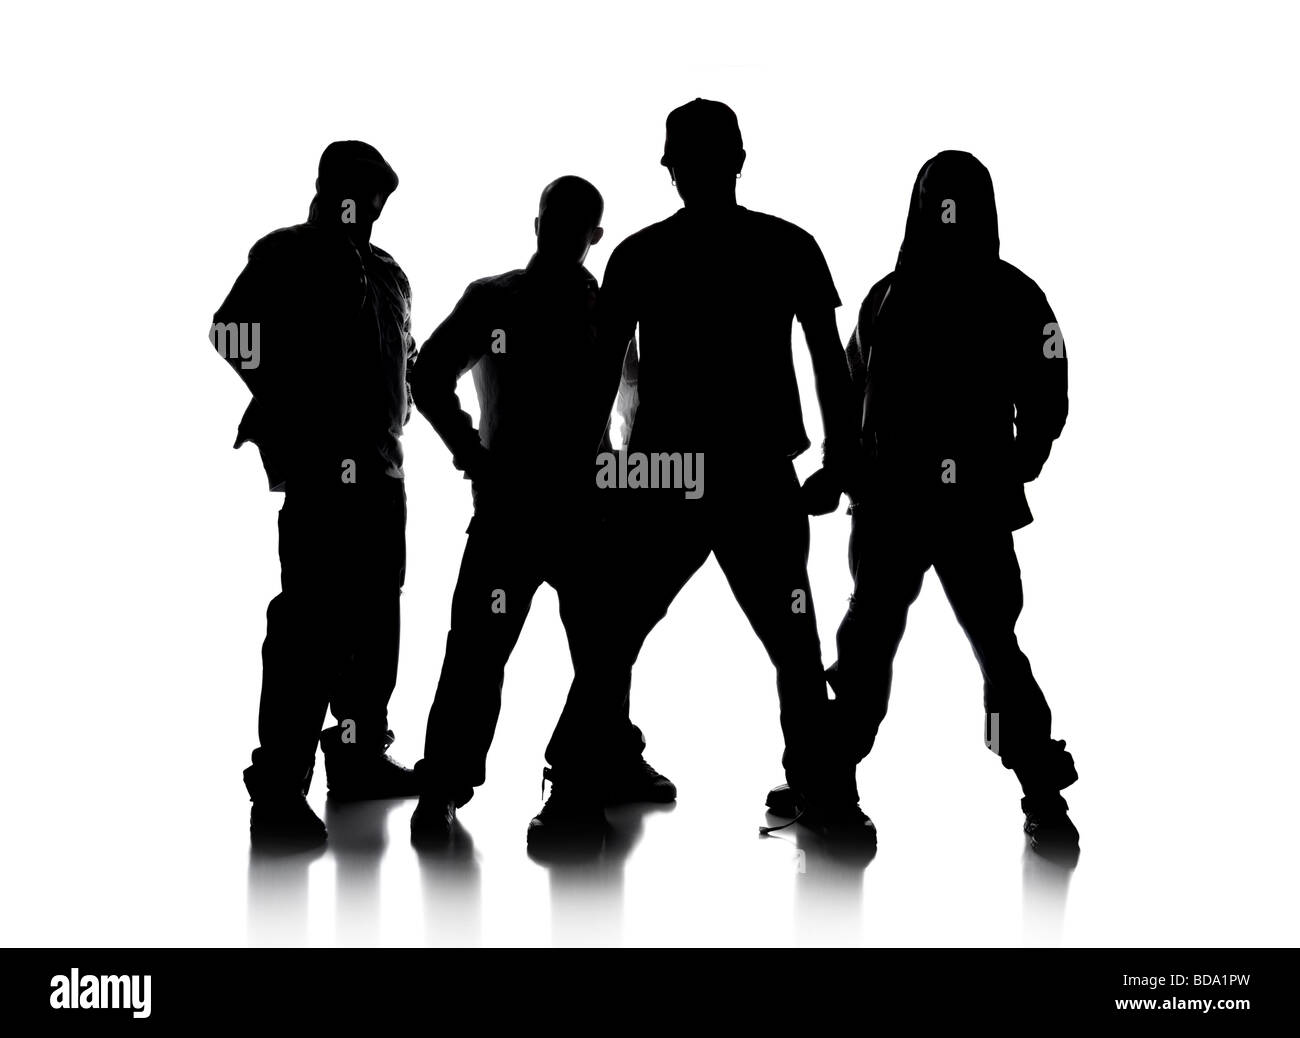 Silhouettes of men standing over a white background Stock Photo